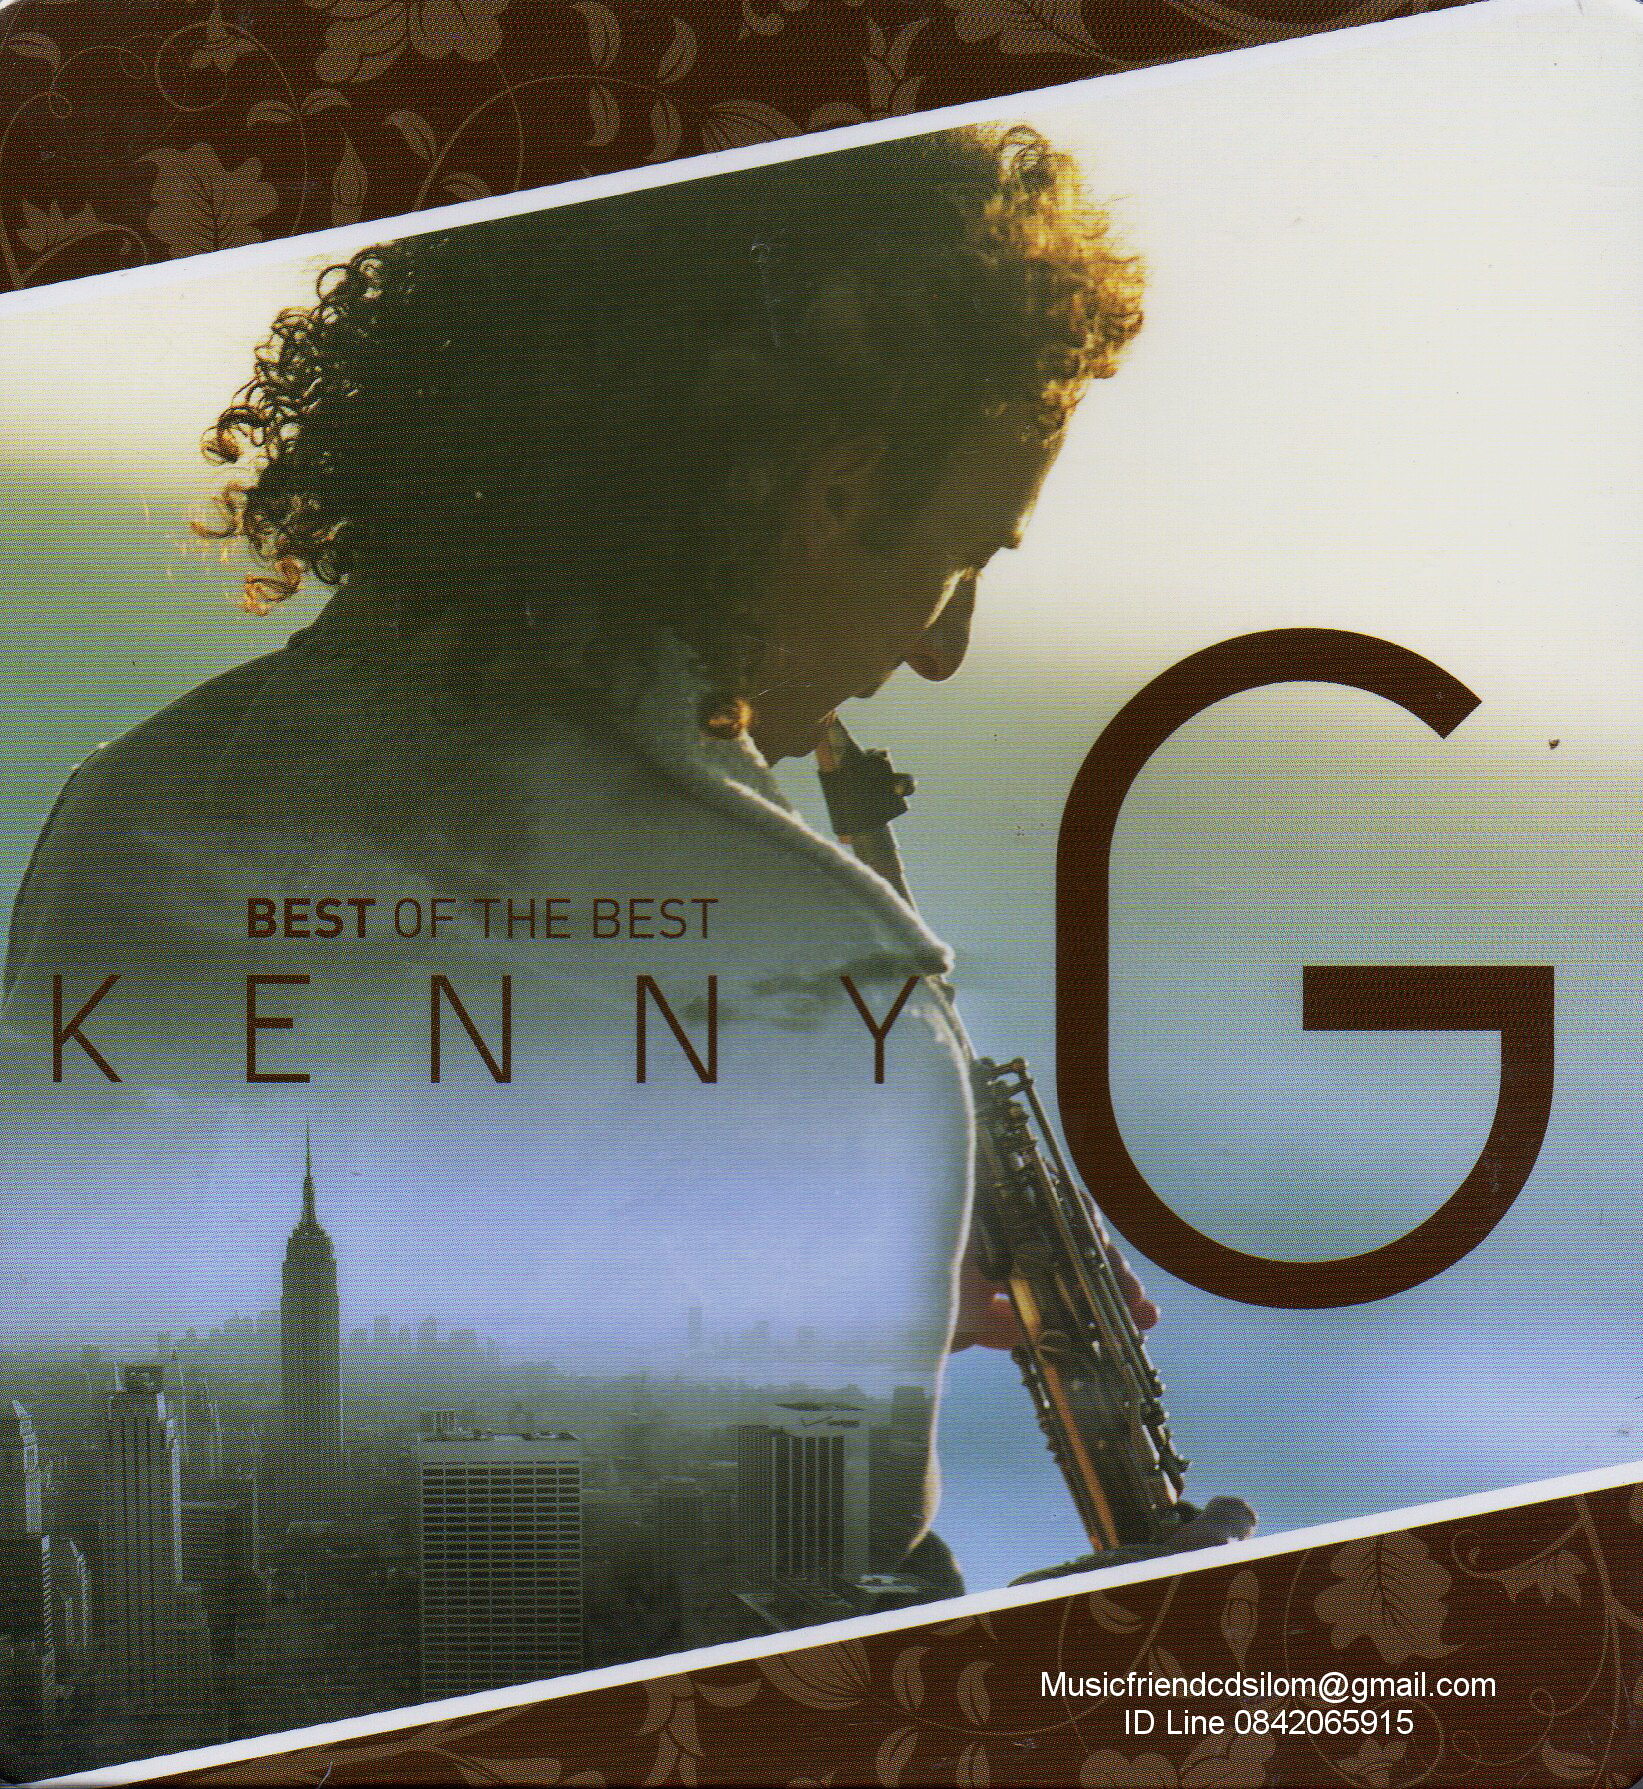 kenny g album with a gold g on disk